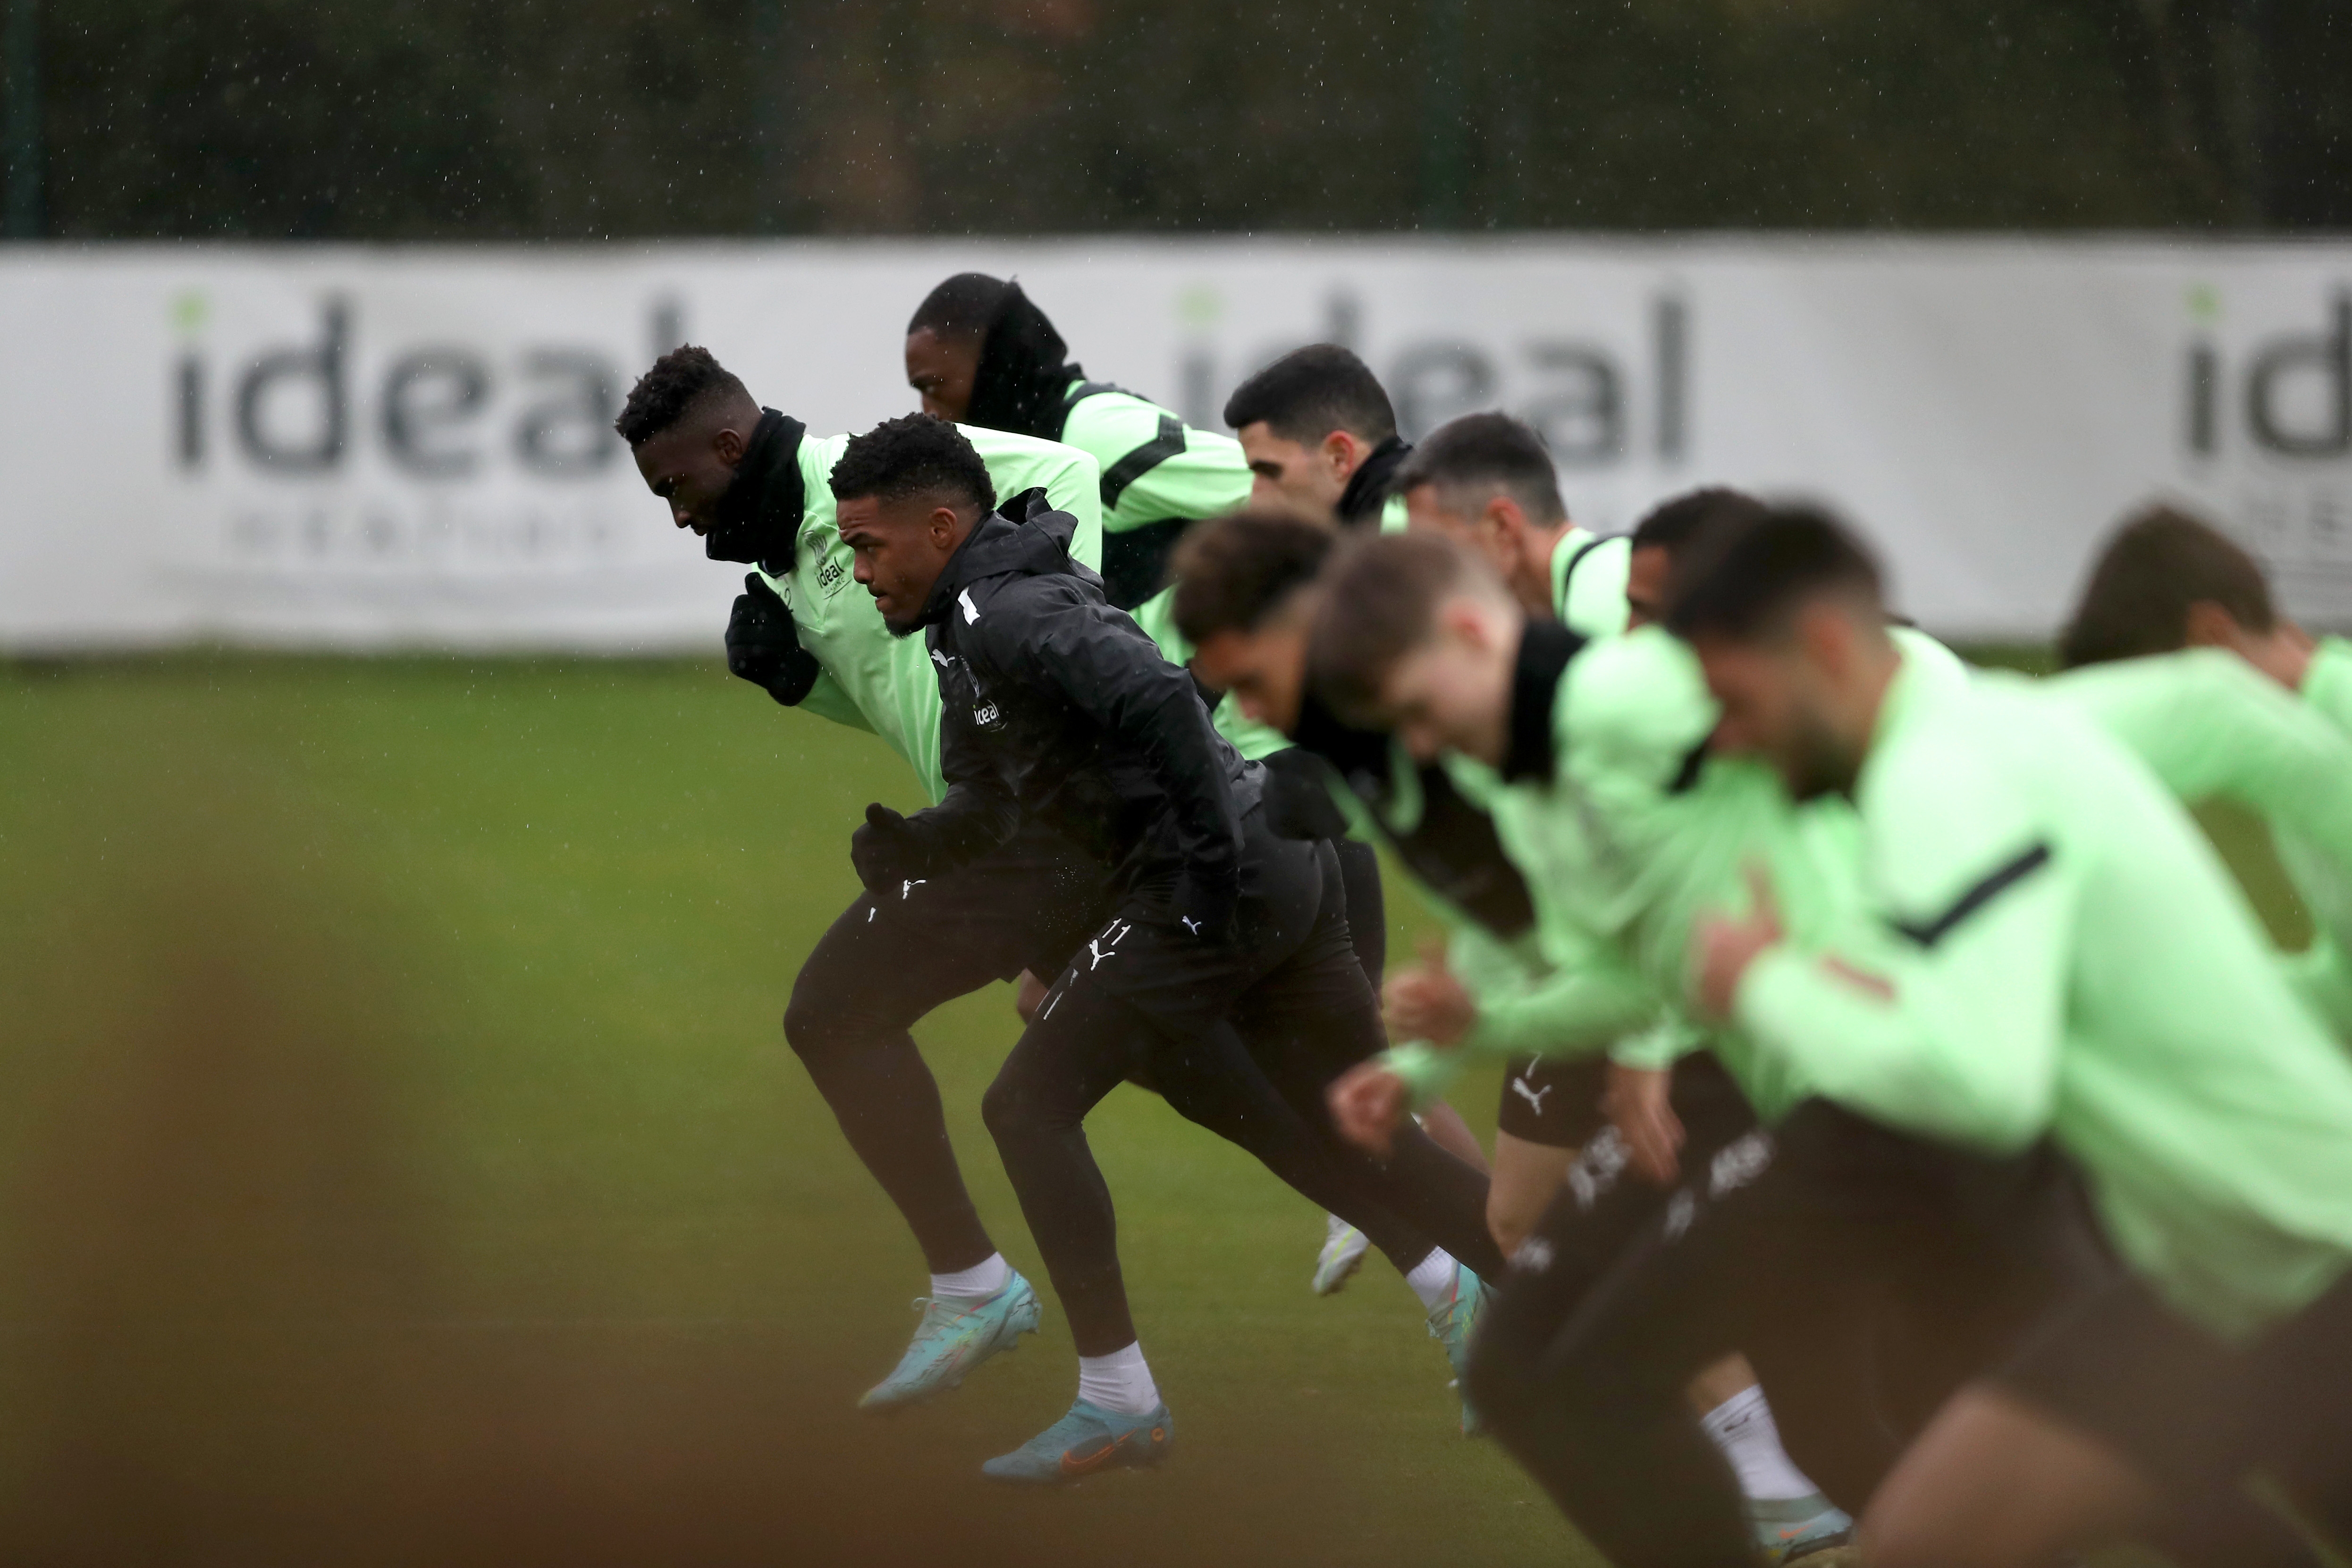 Albion players training.